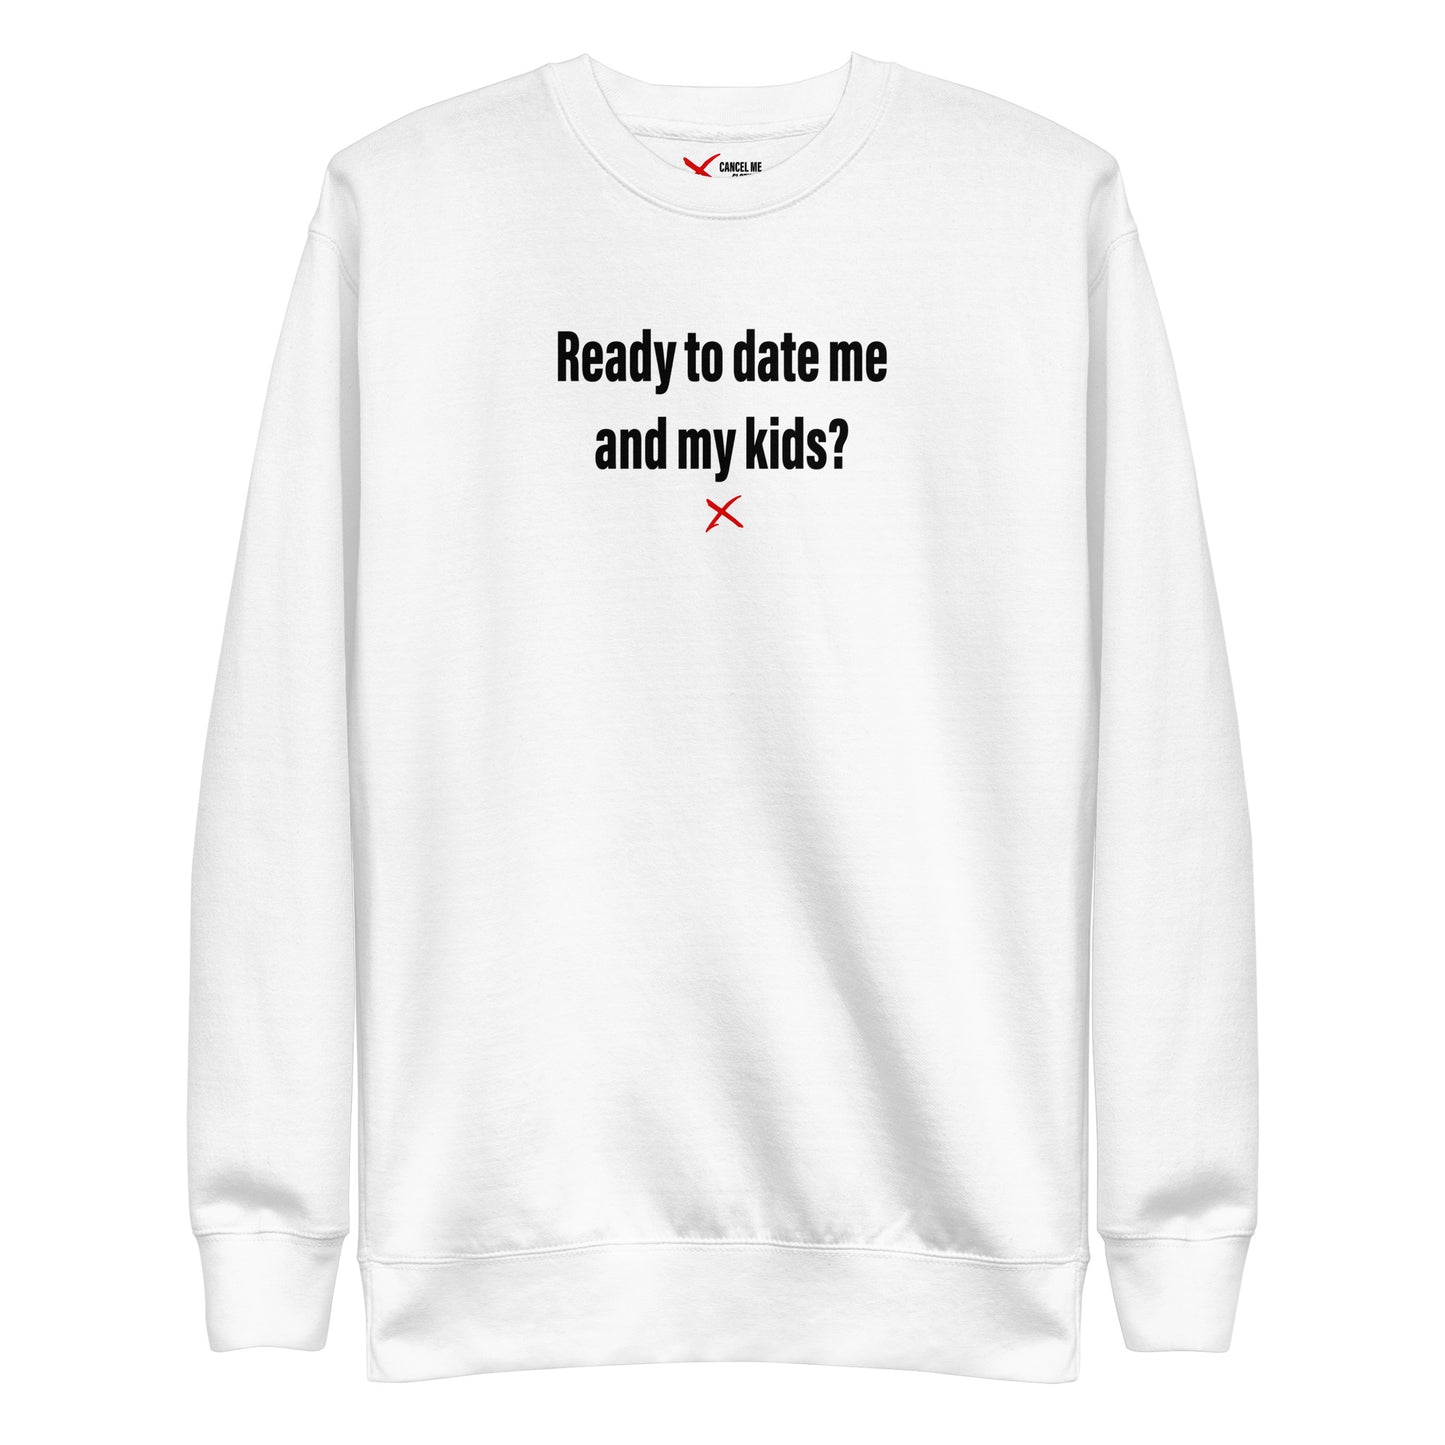 Ready to date me and my kids? - Sweatshirt